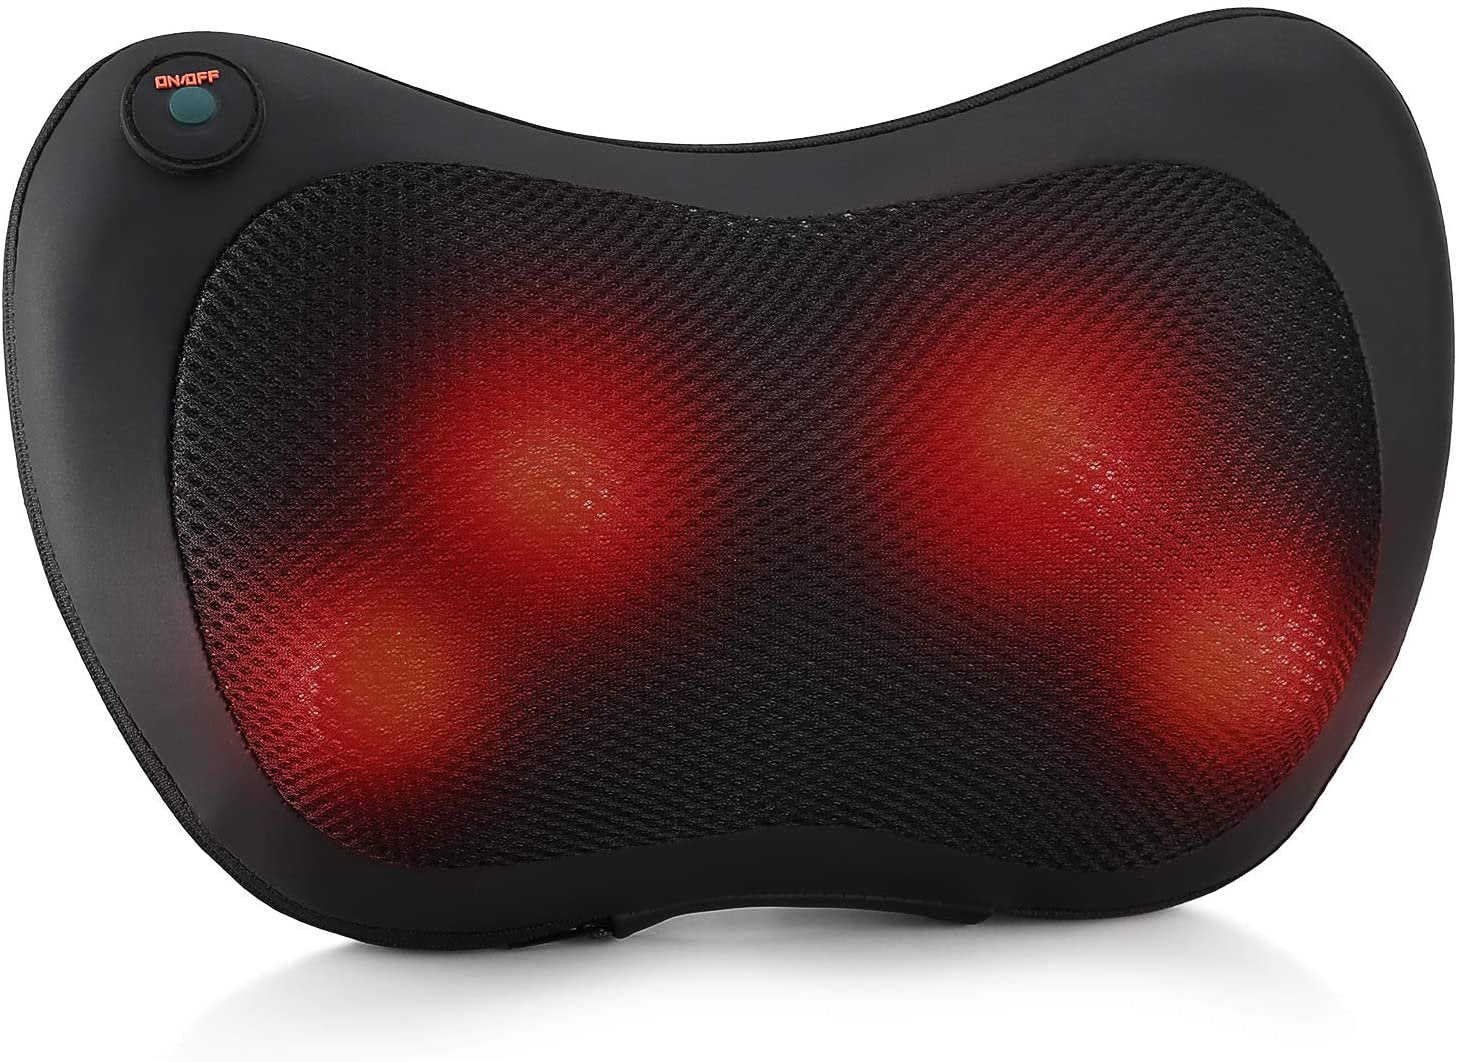 Portable Back Massager Pillow with Heat - Shiatsu Kneading for Black Body Relief